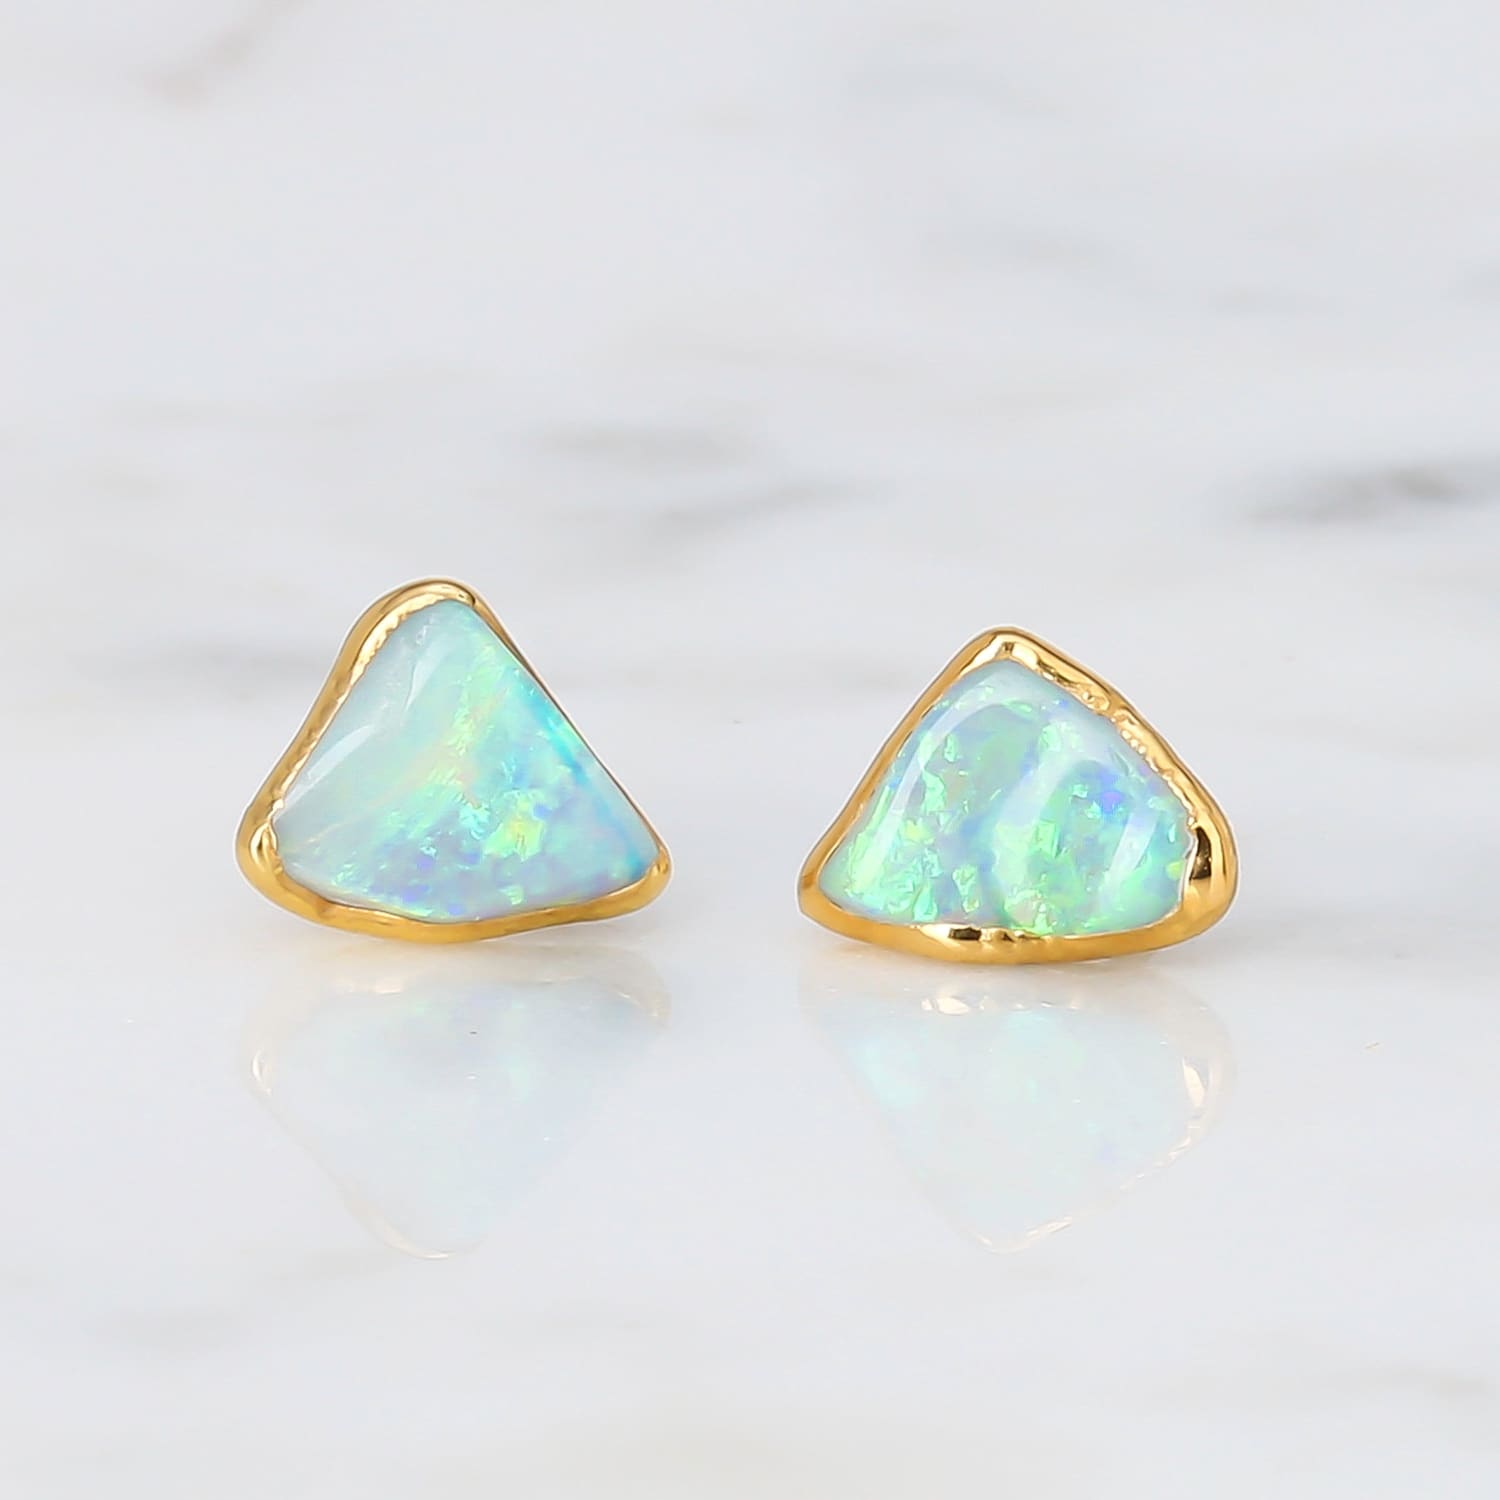 Buy Tiny Opal Studs Online In India - Etsy India